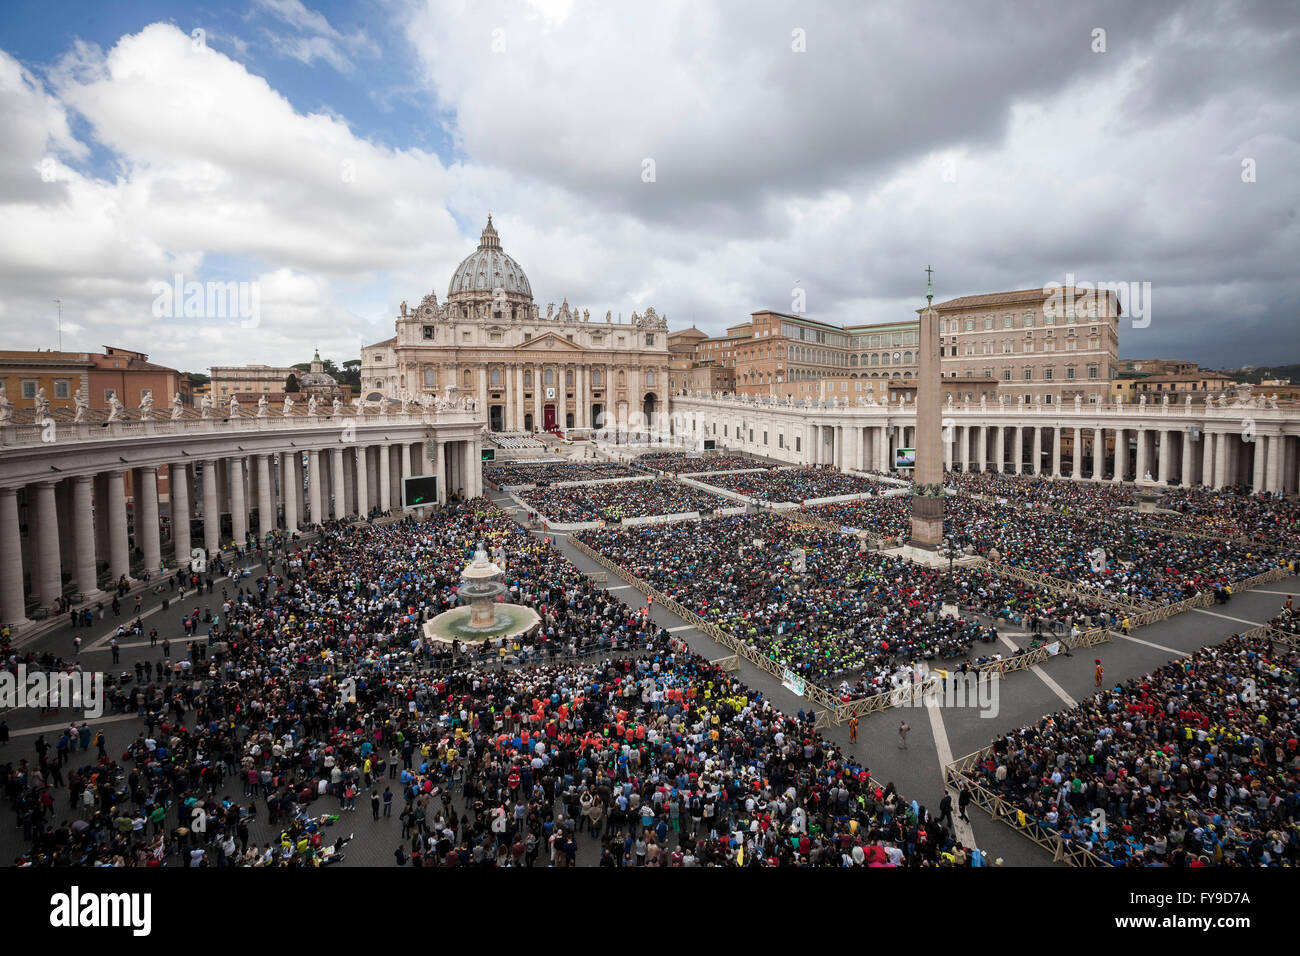 vatican-city-vatican-24th-apr-2016-a-general-view-of-the-crowded-square-FY9D7A.jpg